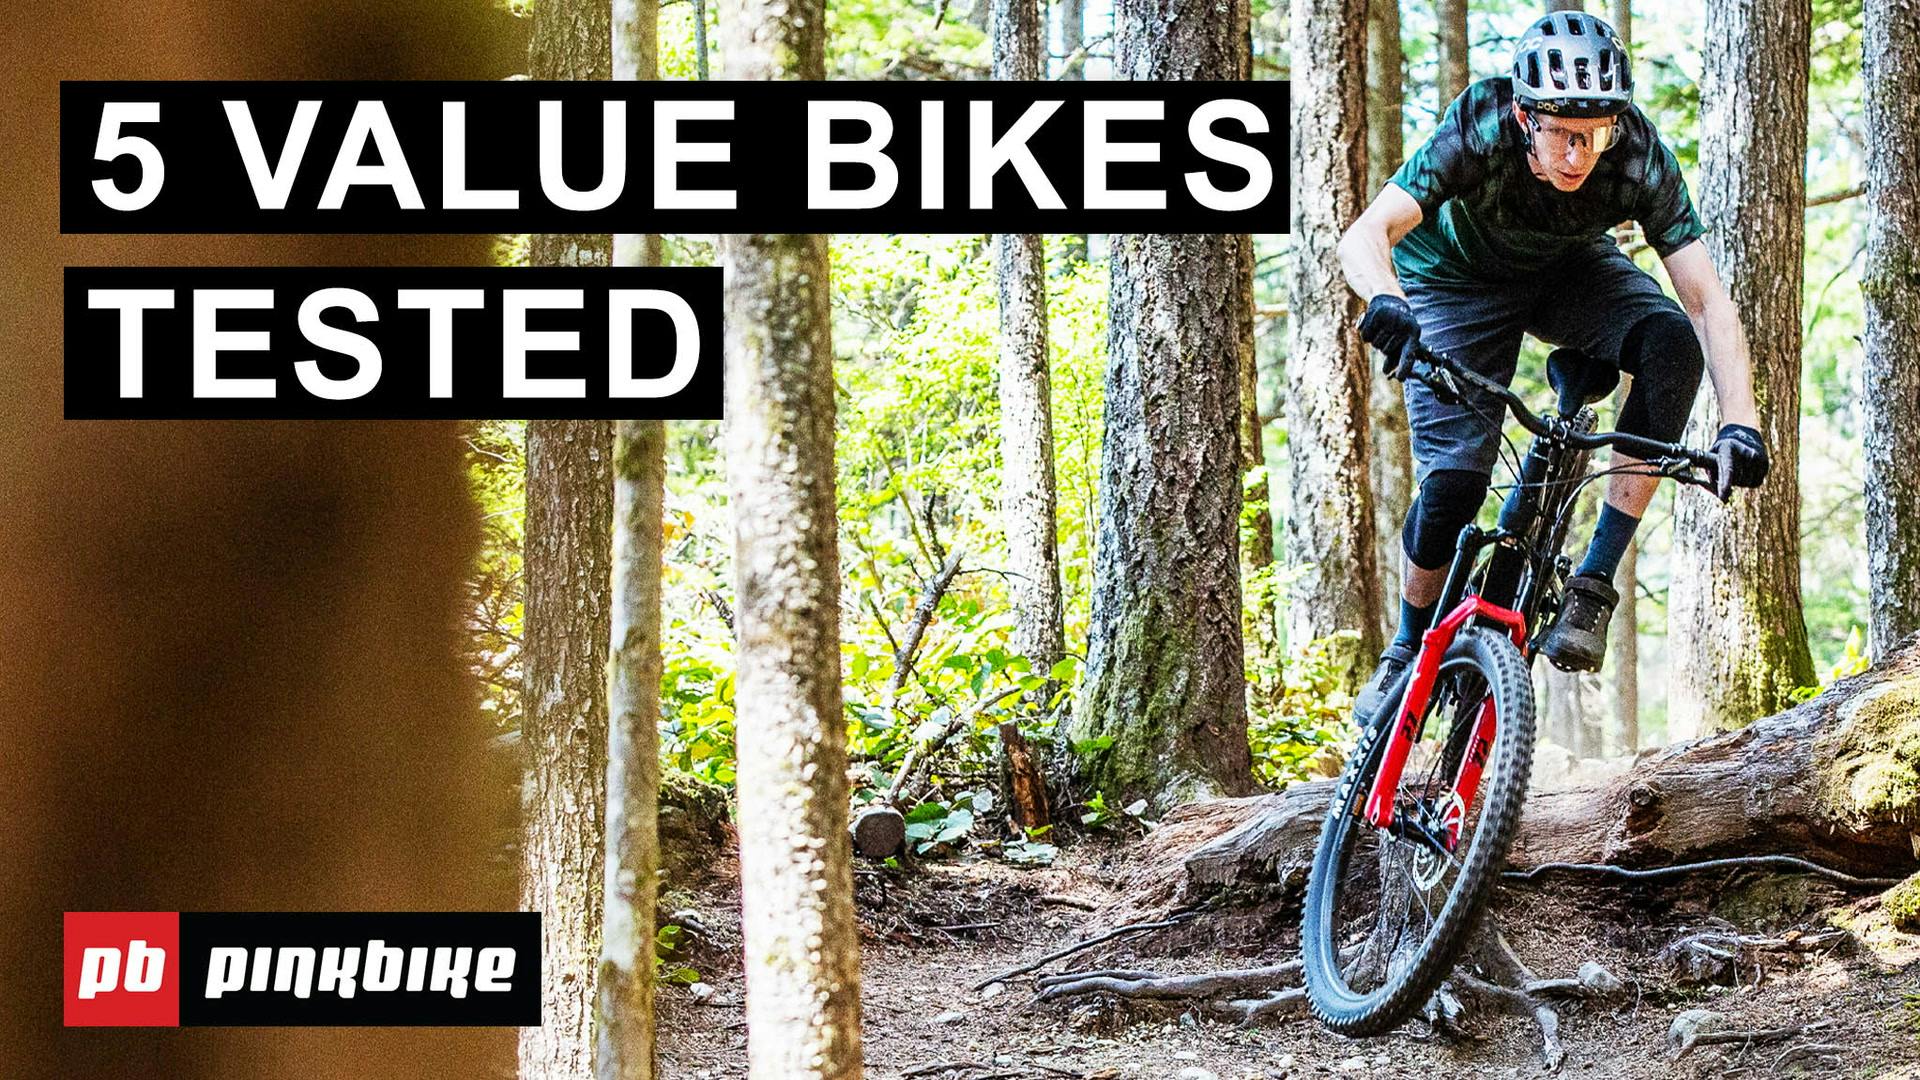 Our Favourite Value Trail Bikes  | Value Bike Field Test: Roundtable Discussion